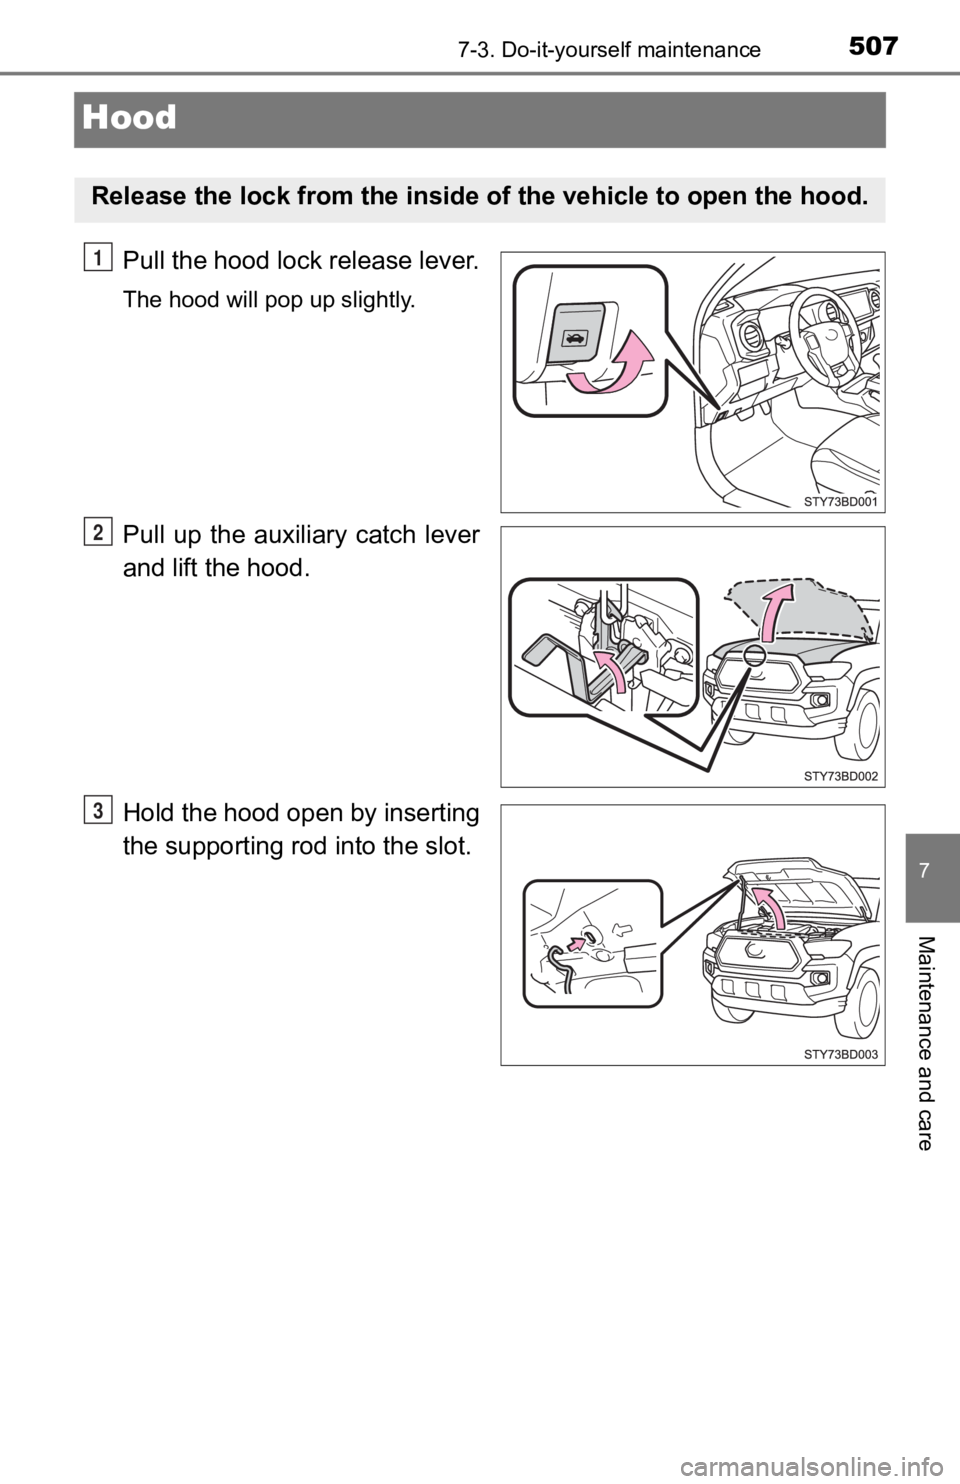 TOYOTA TACOMA 2019  Owners Manual (in English) 5077-3. Do-it-yourself maintenance
7
Maintenance and care
Hood
Pull the hood lock release lever.
The hood will pop up slightly.
Pull  up  the  auxiliary  catch  lever
and lift the hood.
Hold the hood 